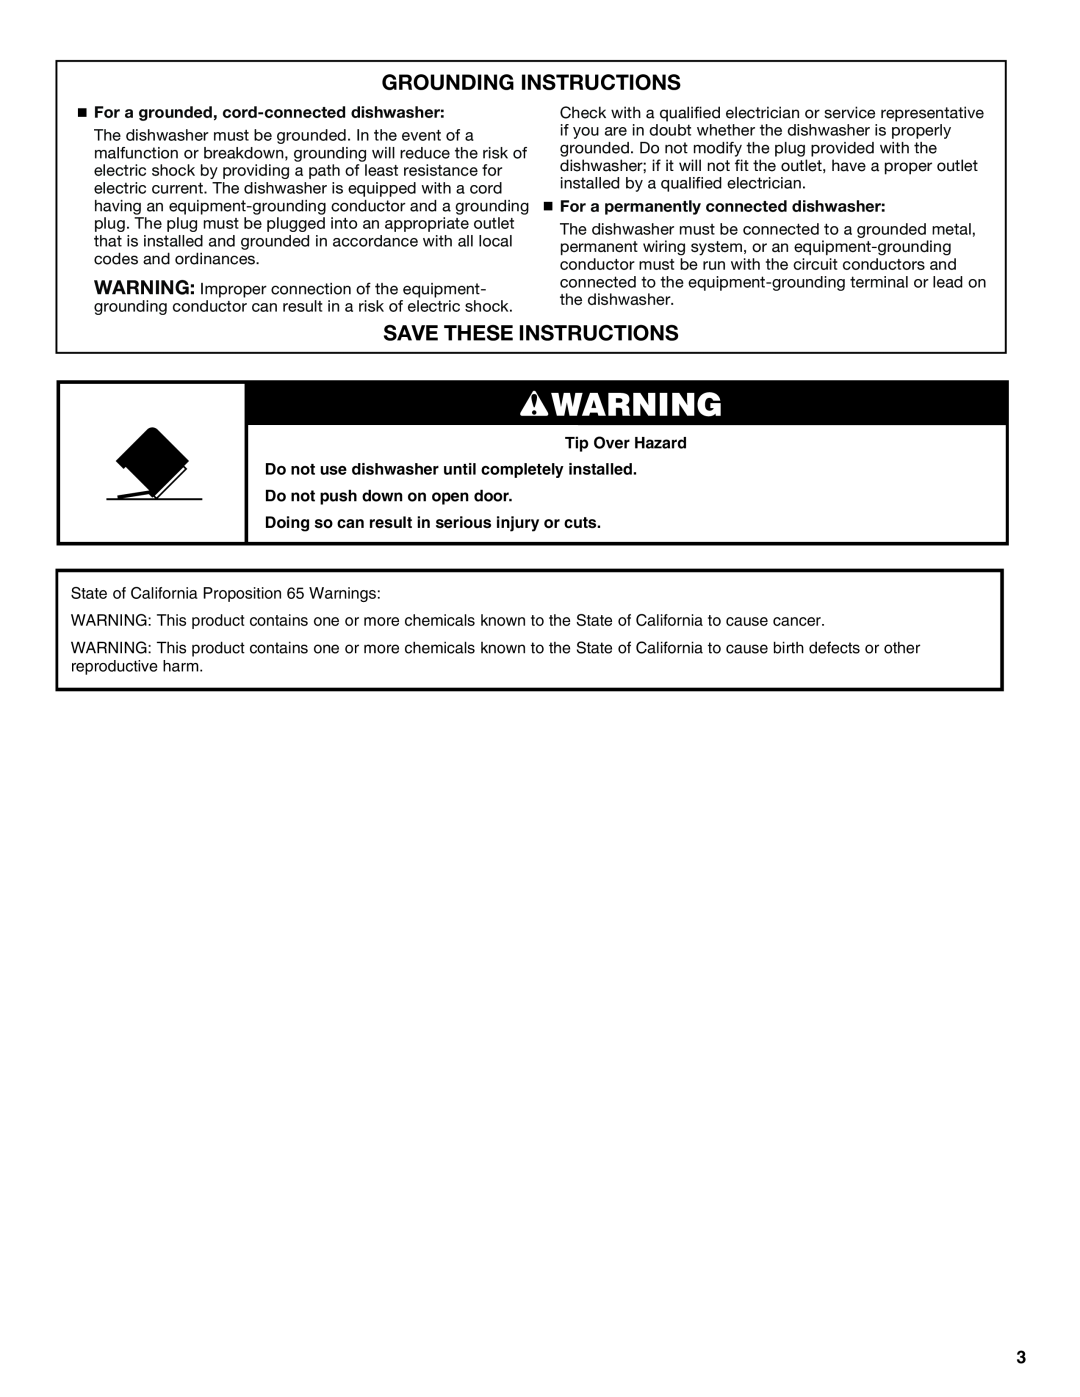 Whirlpool W10300929B warranty Grounding Instructions, Save These Instructions, For a grounded, cord-connecteddishwasher 